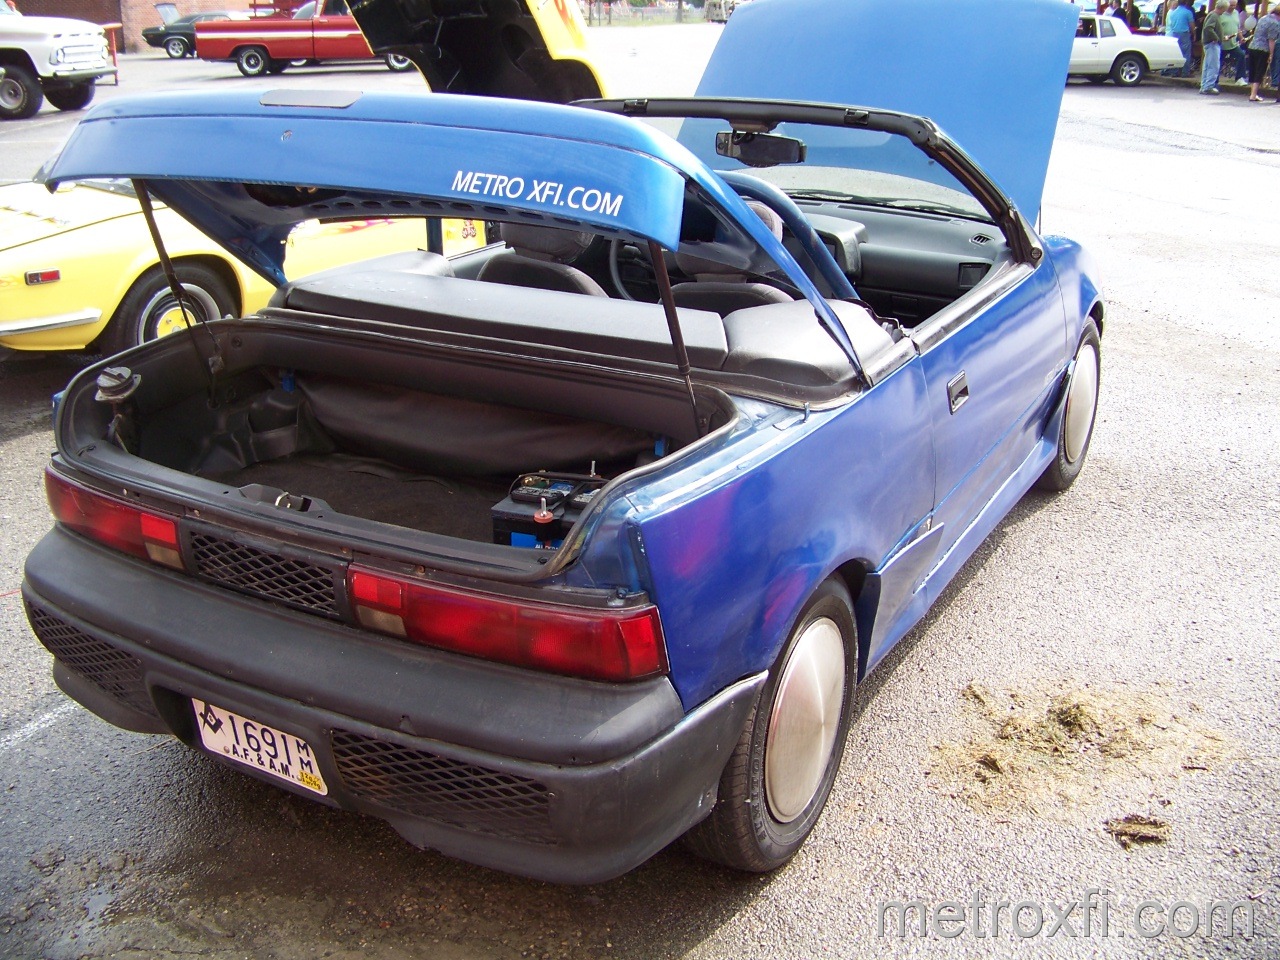 Geo Metro XFI Convertible Project Finished - Page 22 - Fuel ...